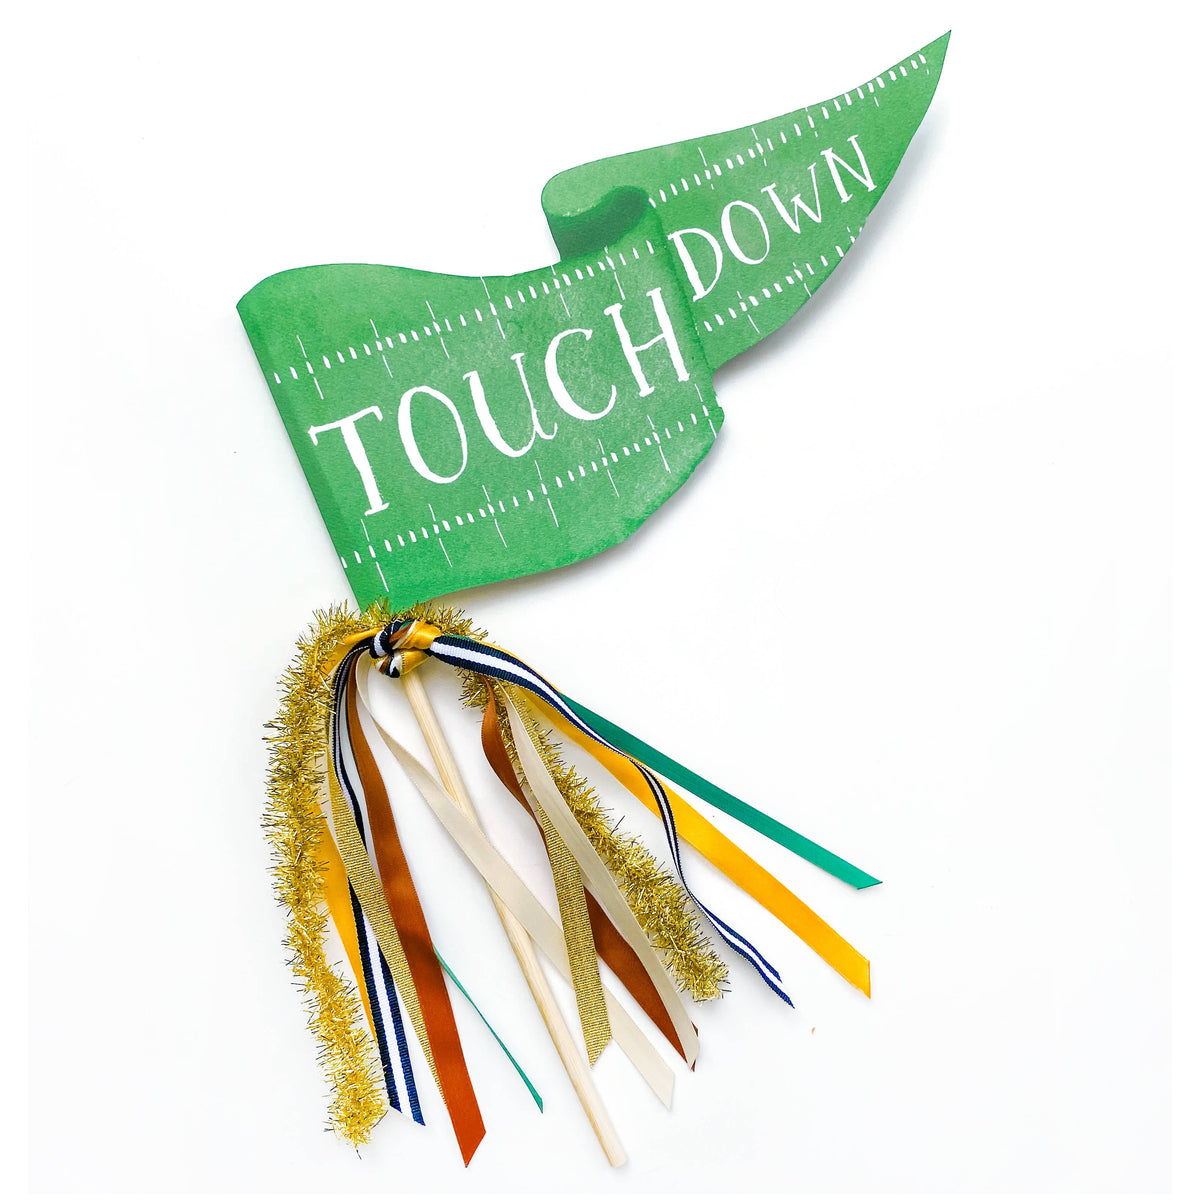 Touchdown Football Tailgate Party Pennant - The Preppy Bunny